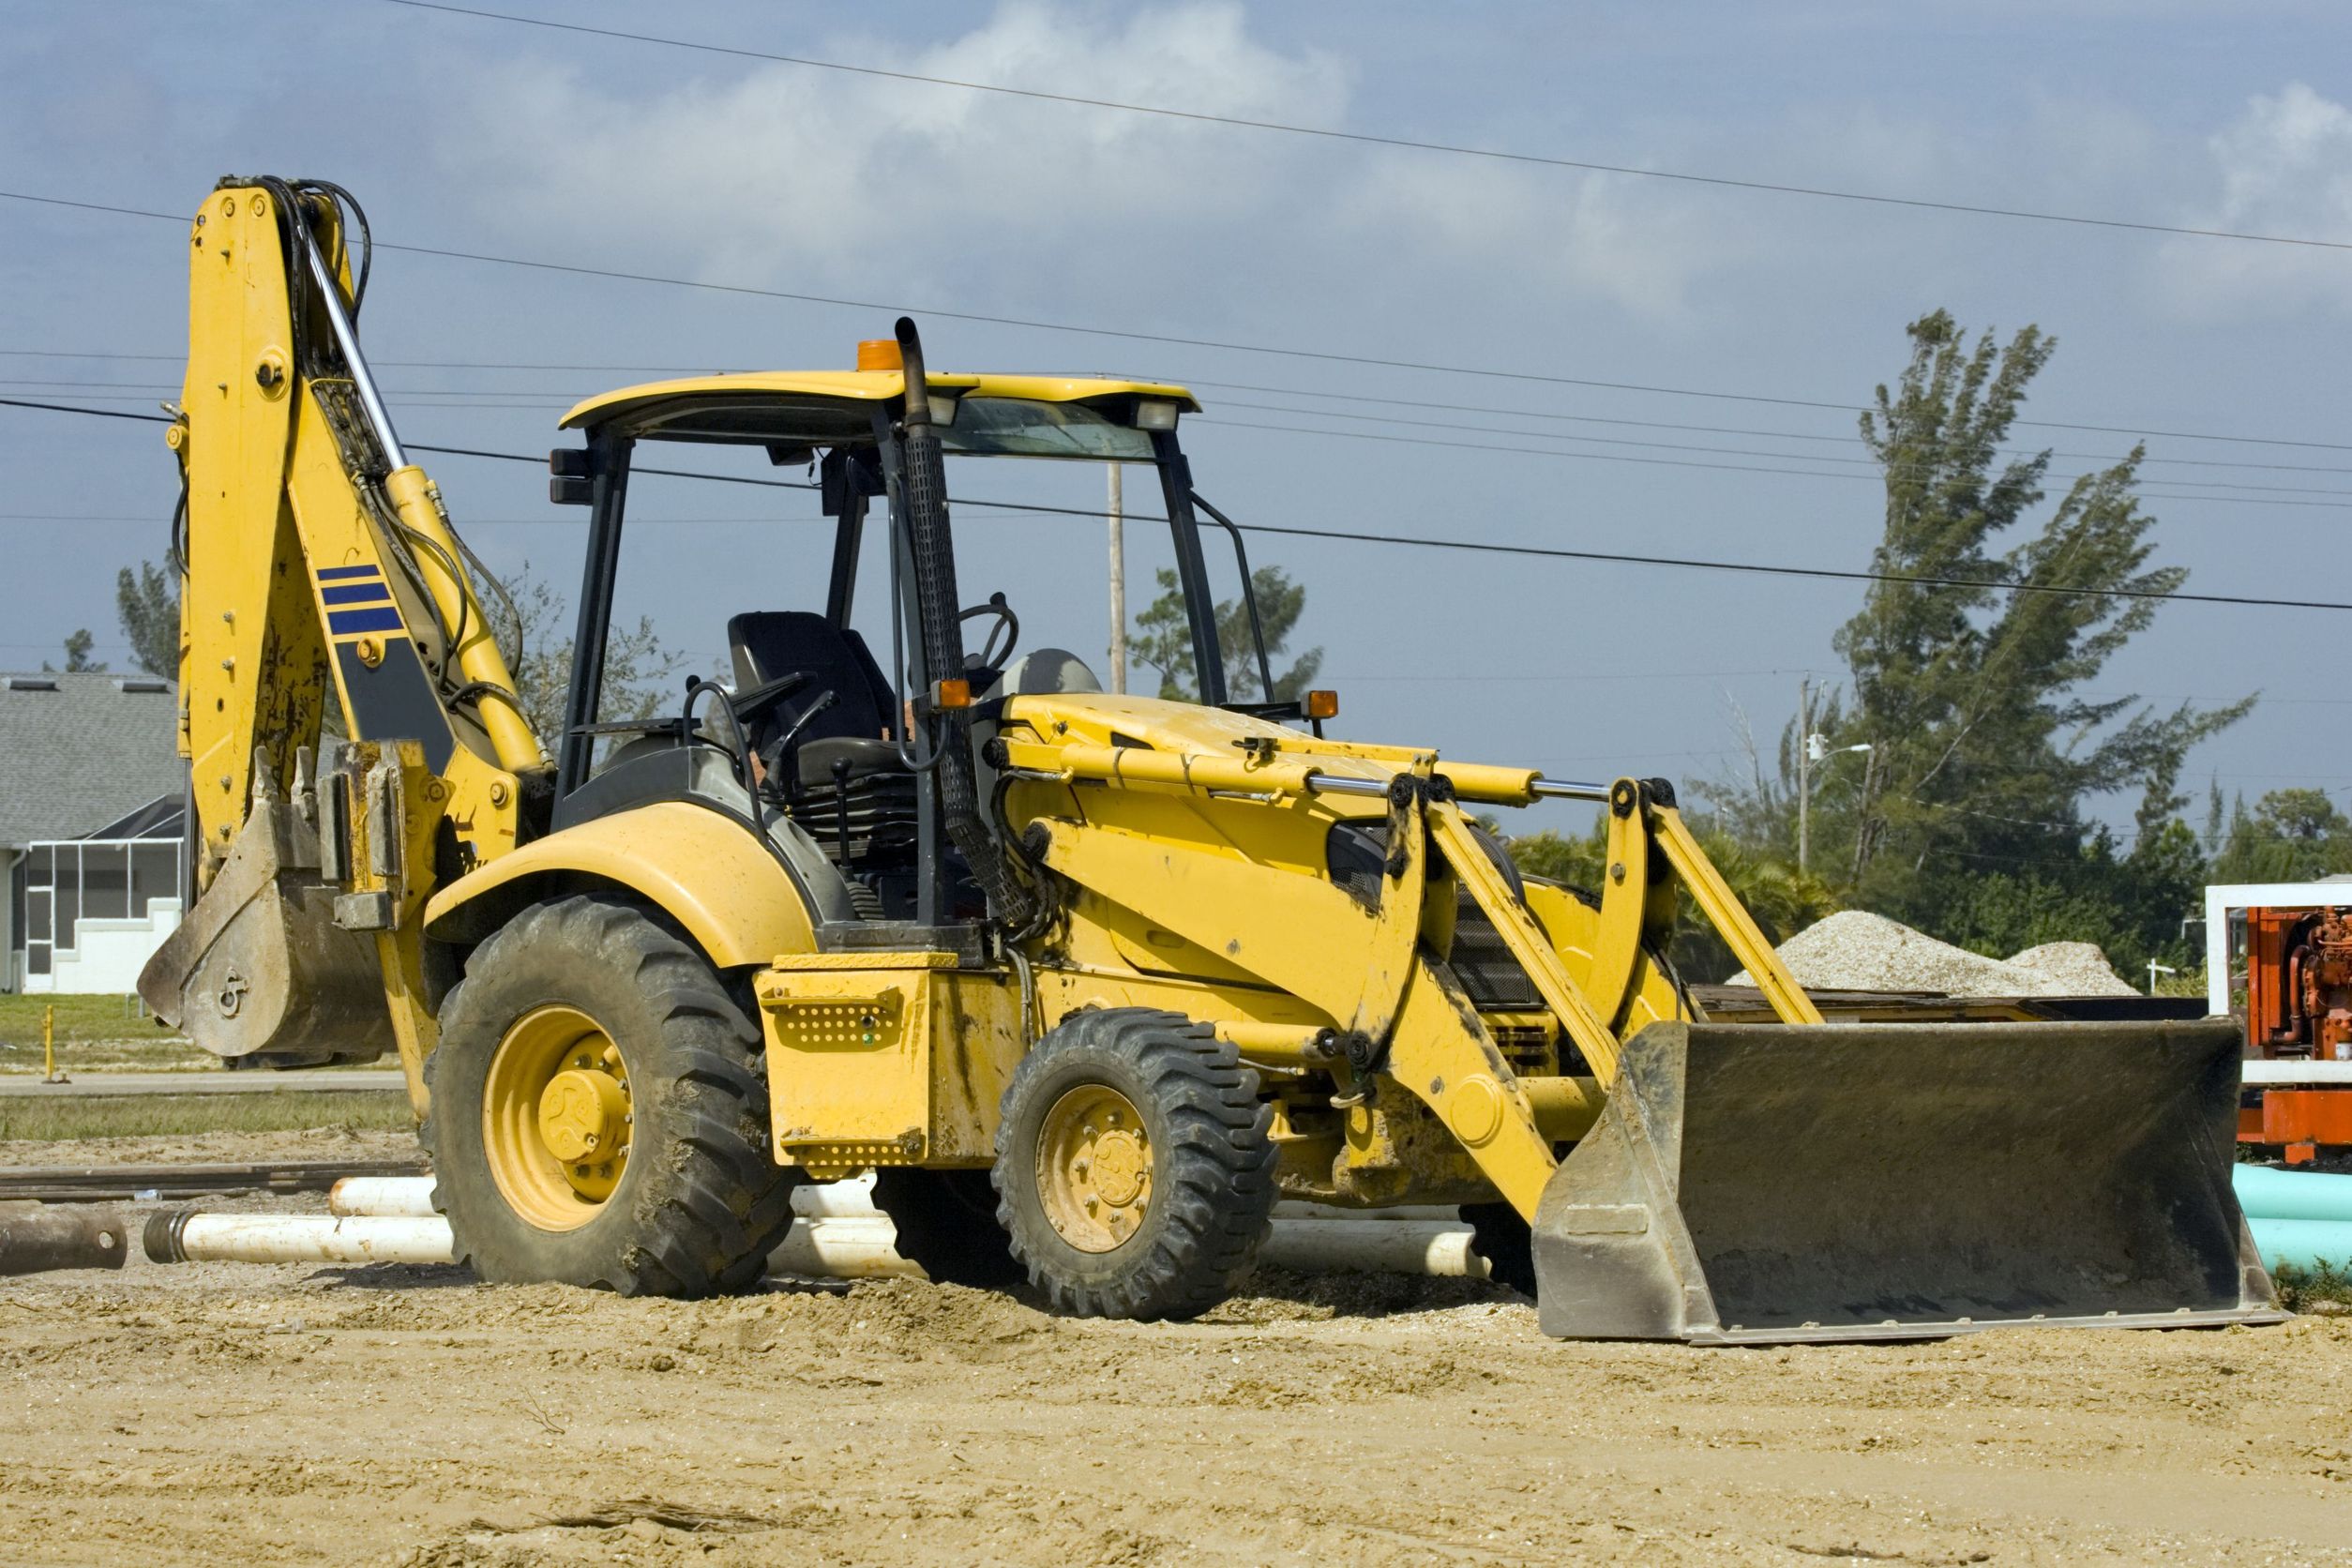 Be Prepared for the Job with Equipment Rental in Maryville, MO